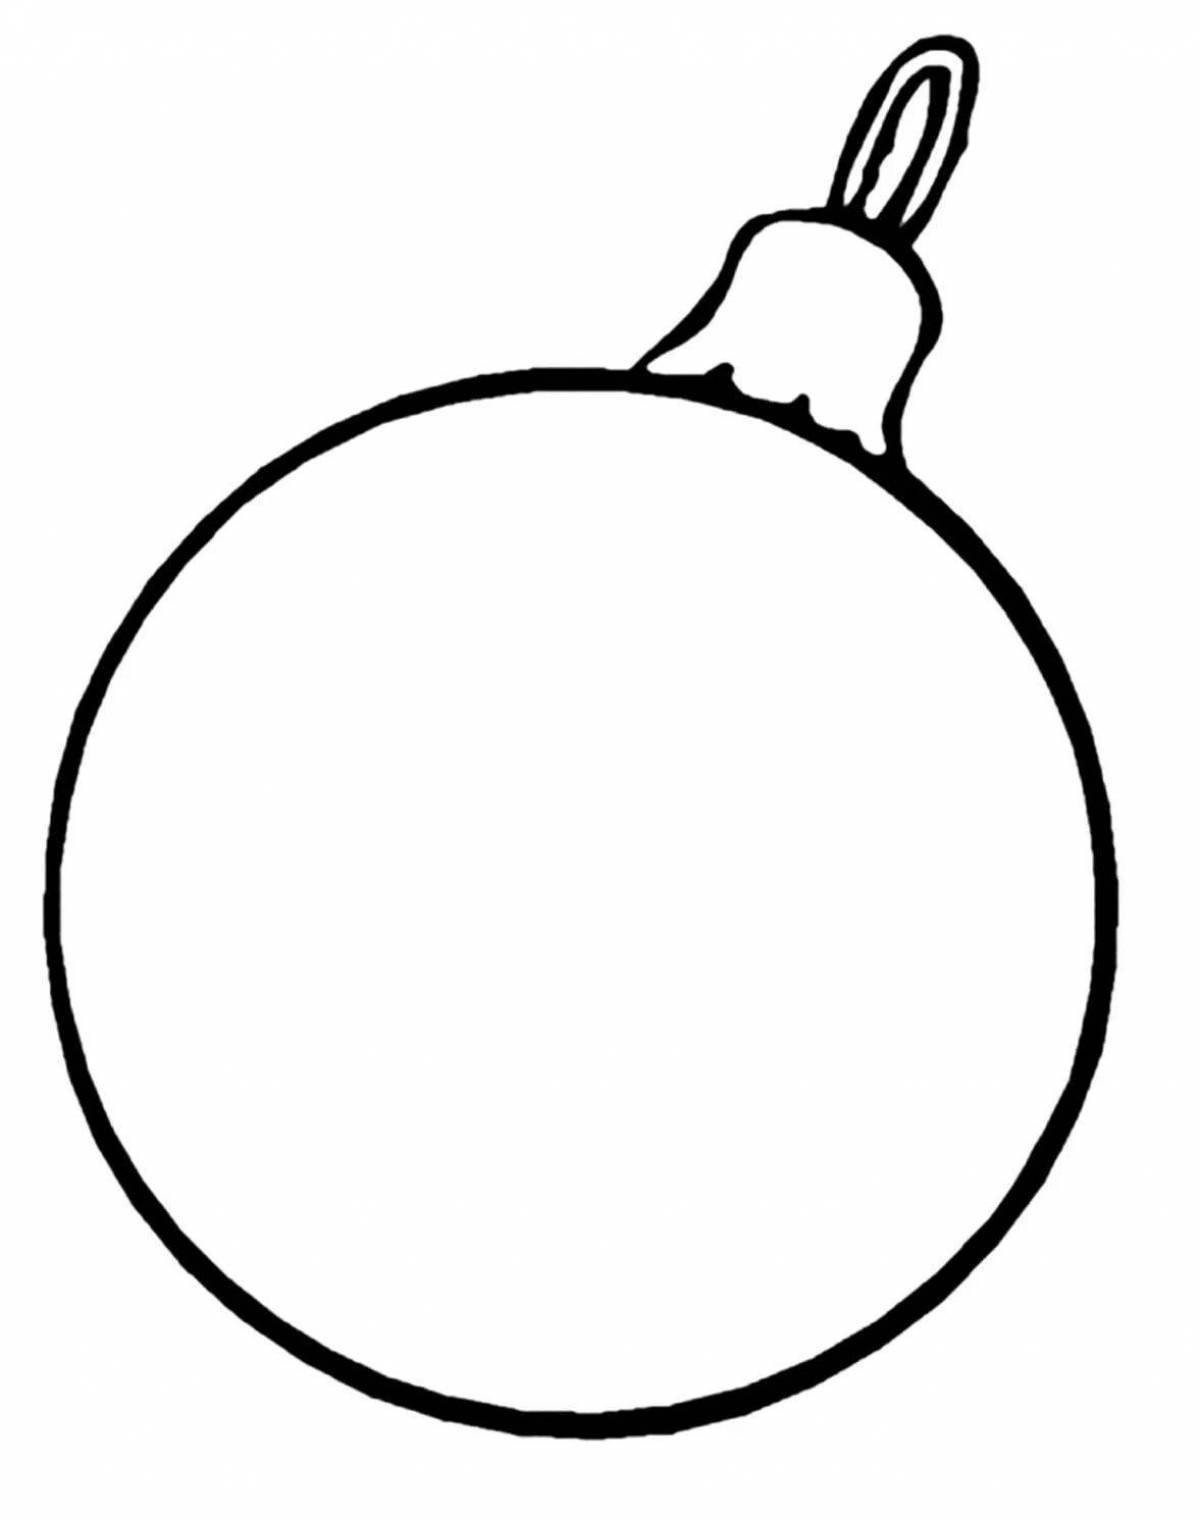 Christmas ornaments coloring book